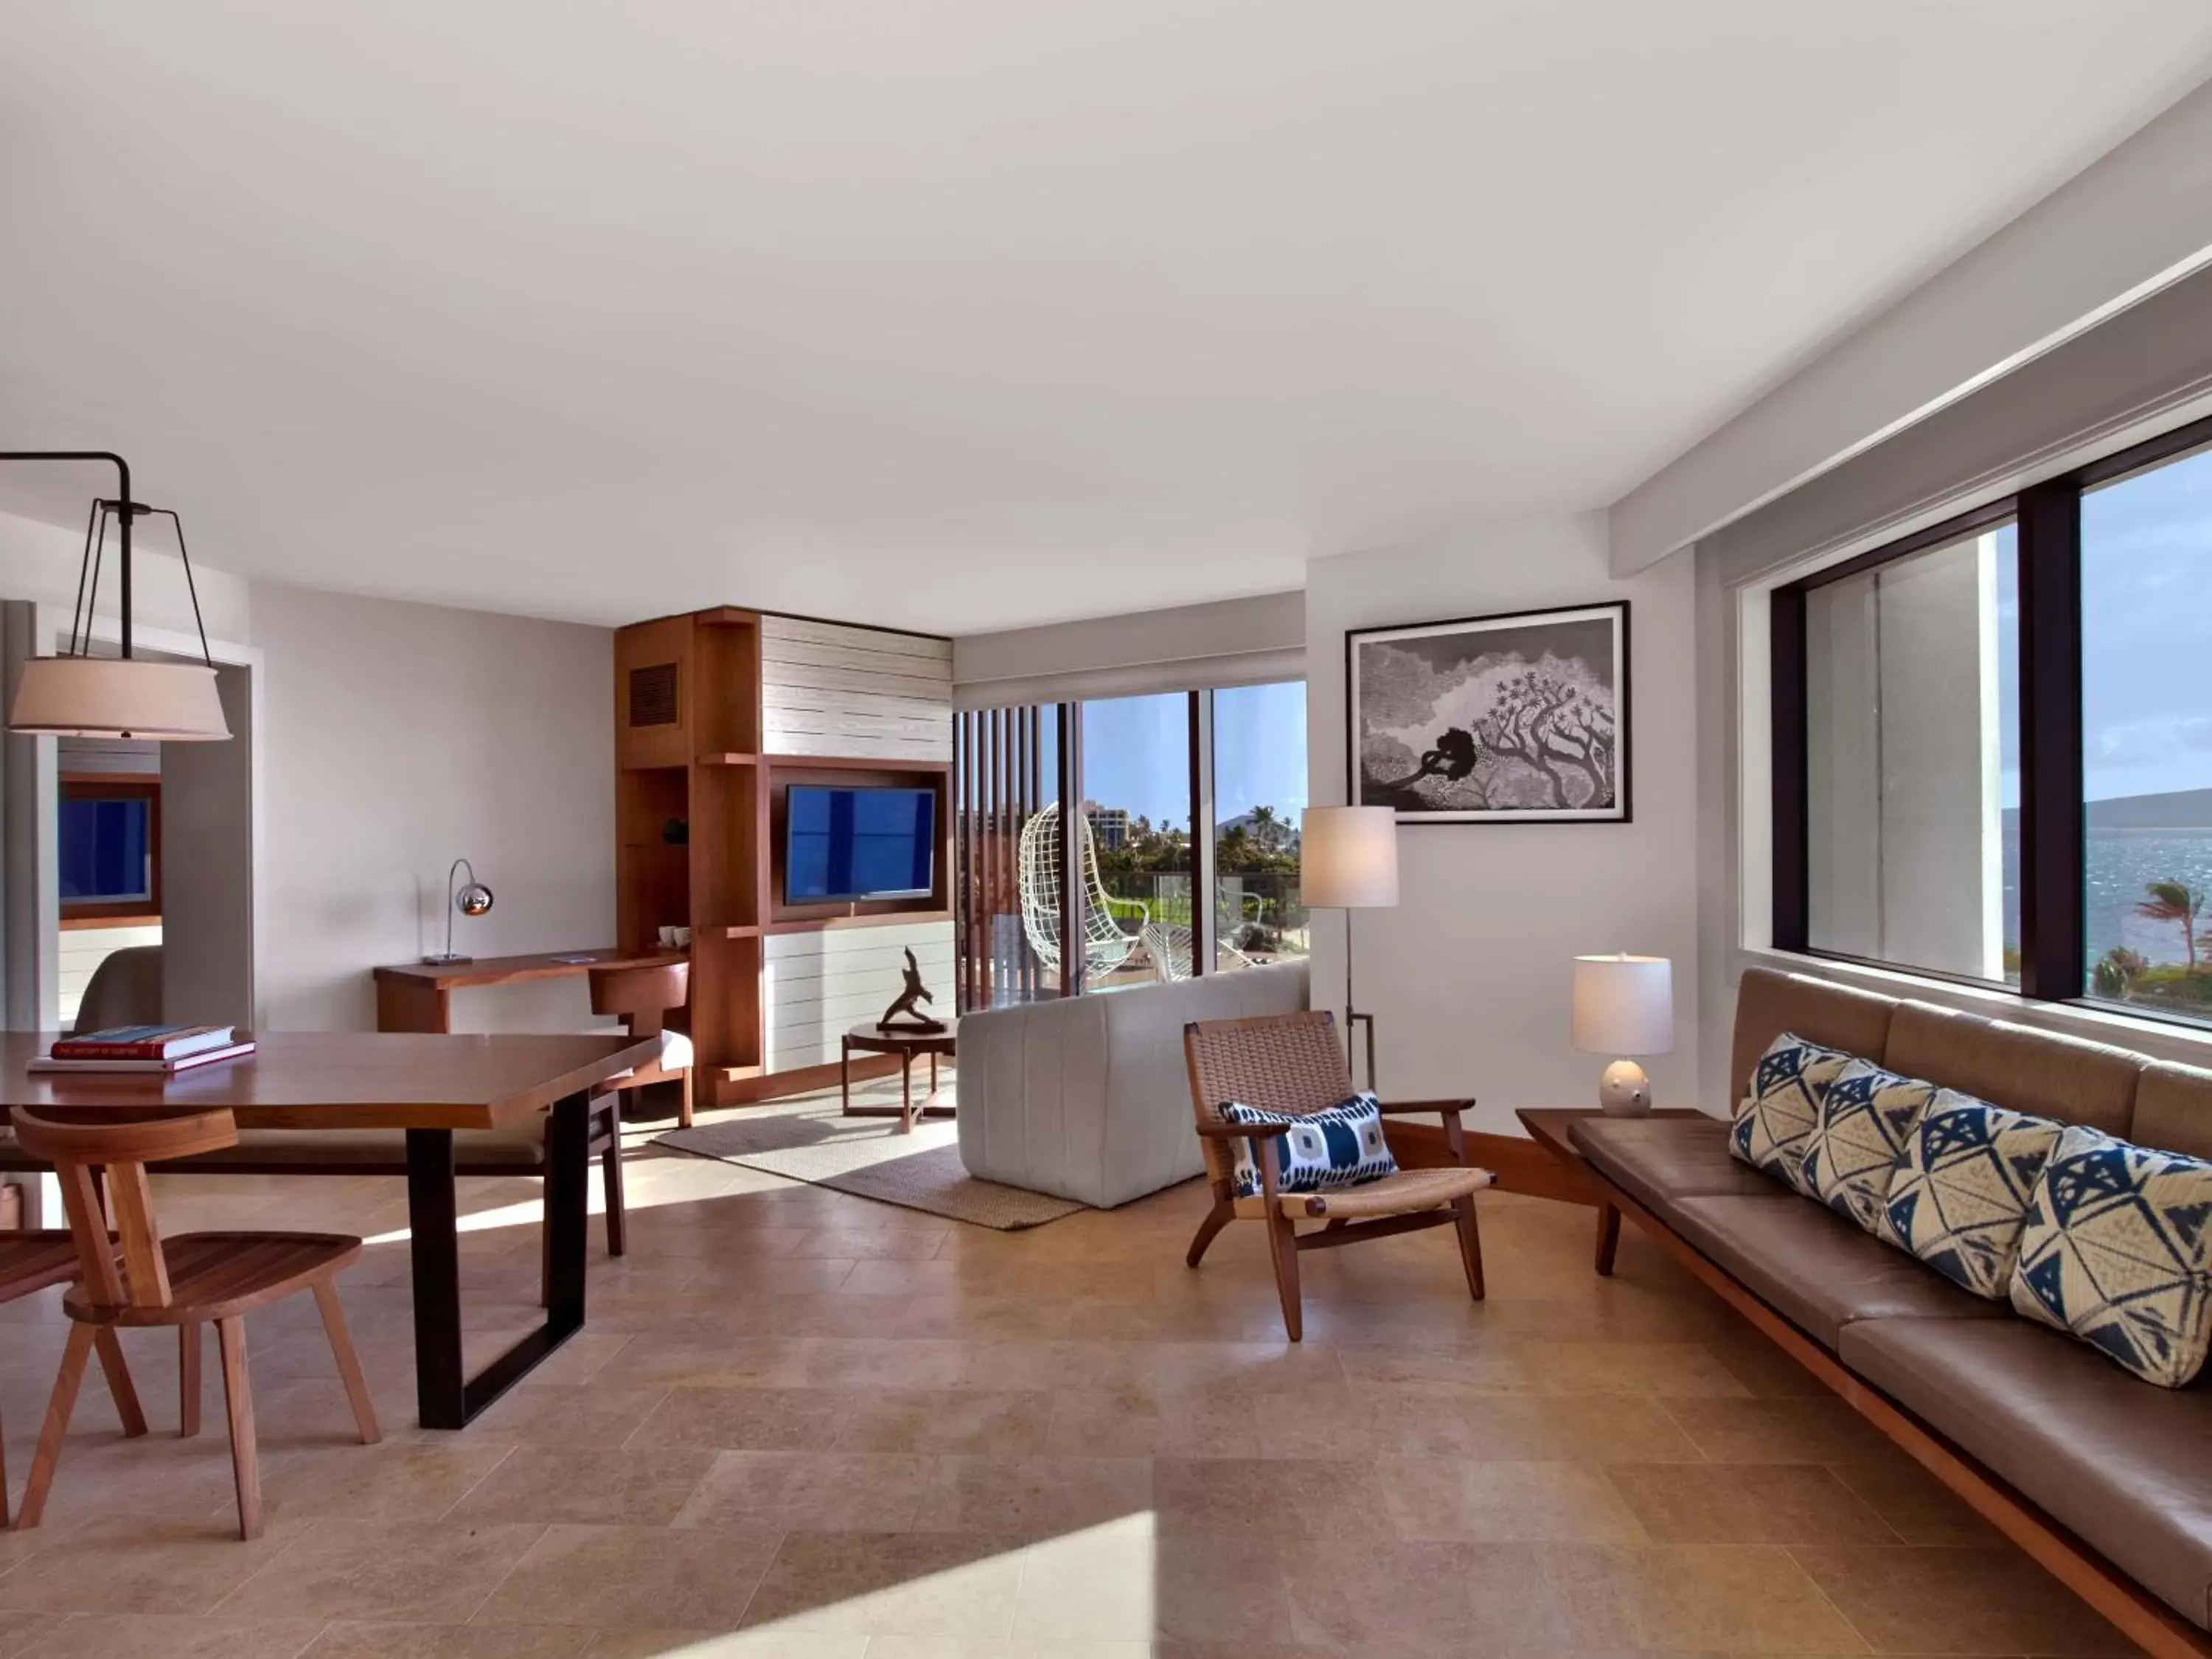 Deluxe Suite with Ocean View in Andaz Maui at Wailea Resort - A Concept by Hyatt